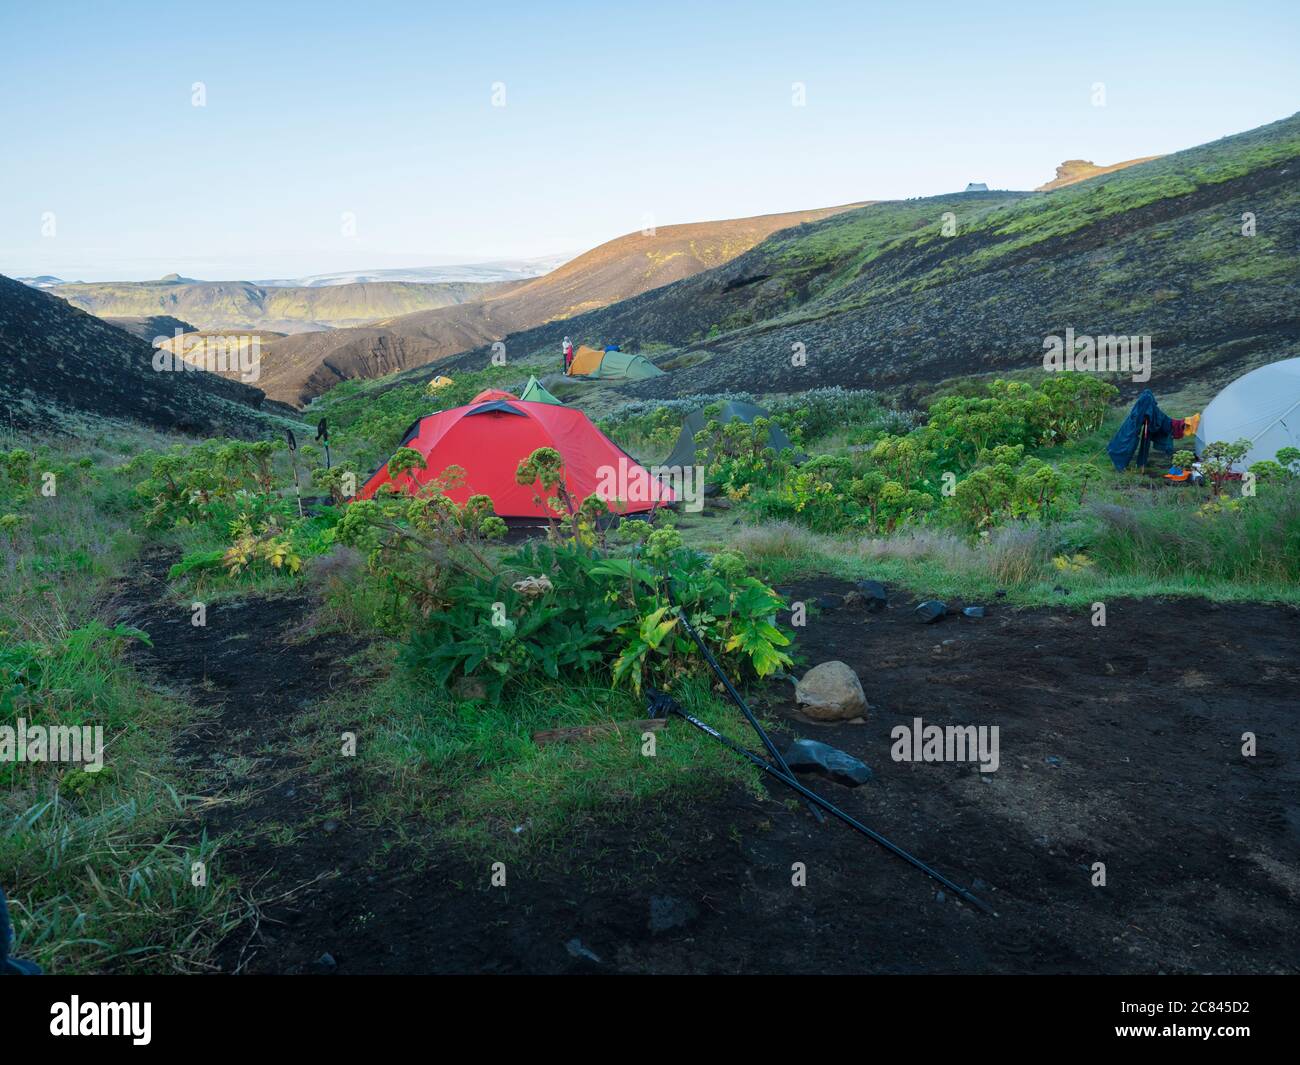 ICELAND, LANDMANNALAUGAR, August 2, 2019: Colorful tents in Botnar campsite at Iceland on Laugavegur hiking trail, green valley in volcanic landscape Stock Photo